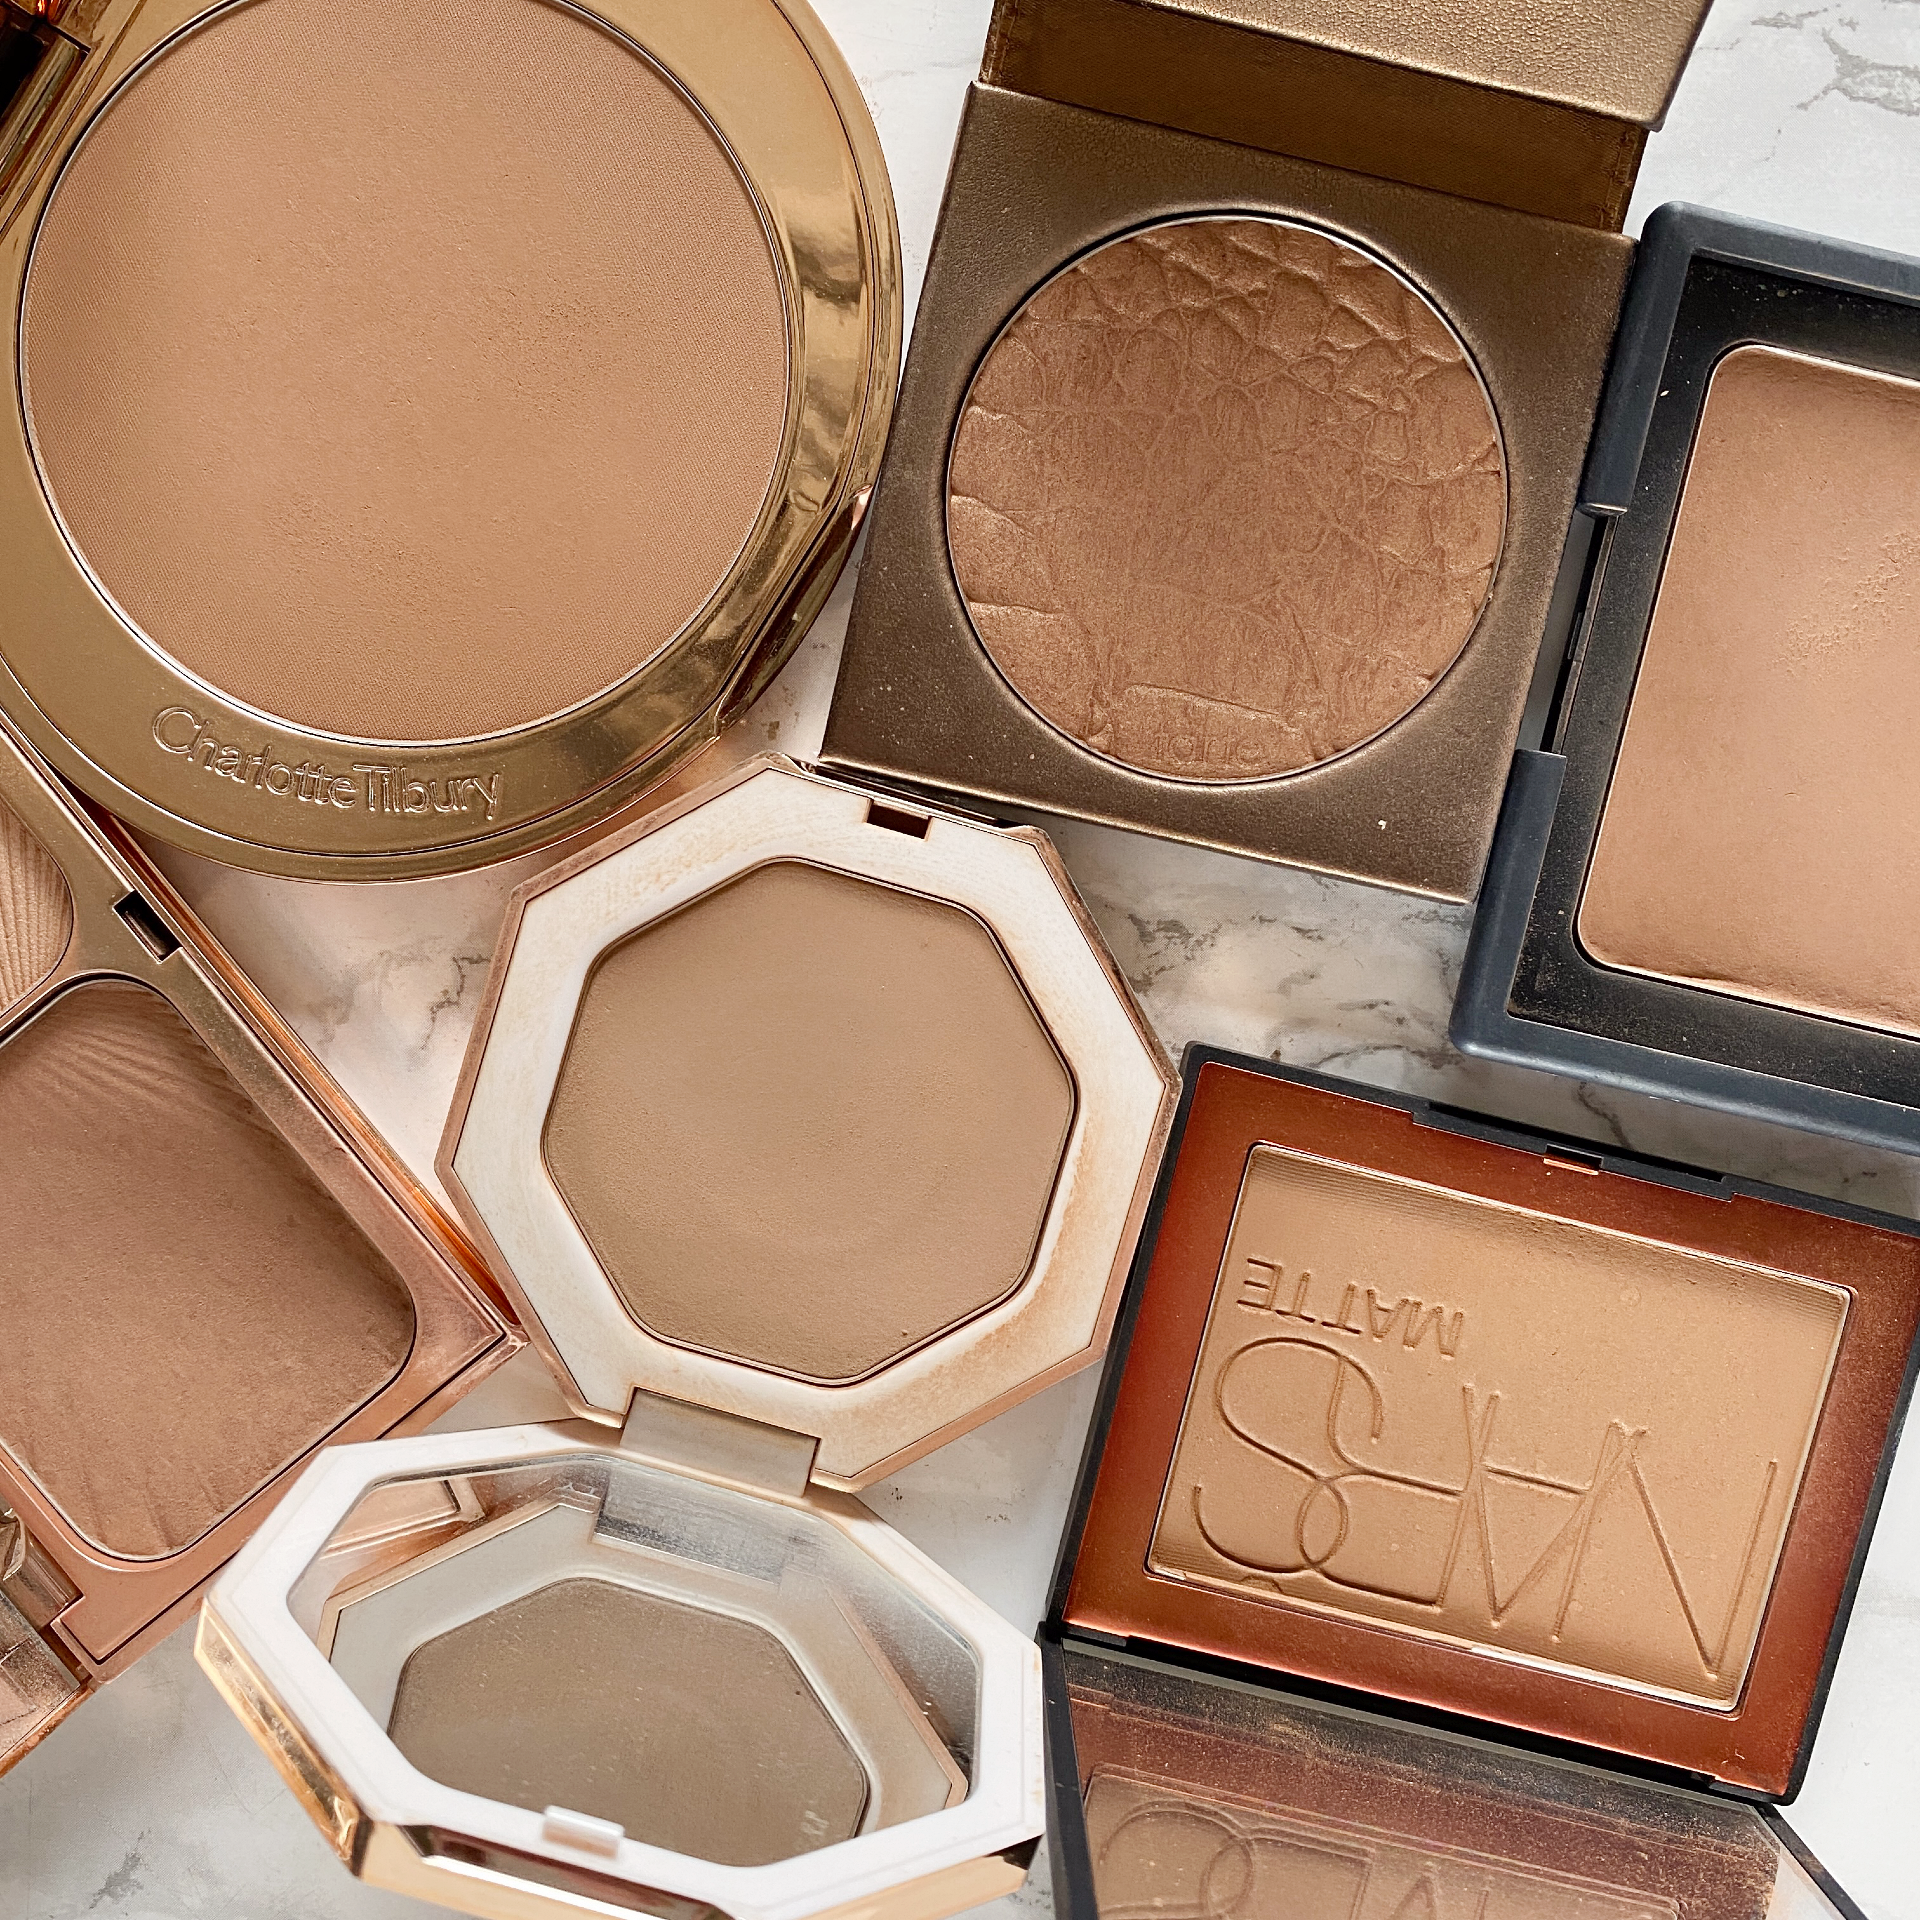 bronzer collection Charlotte tilbury review